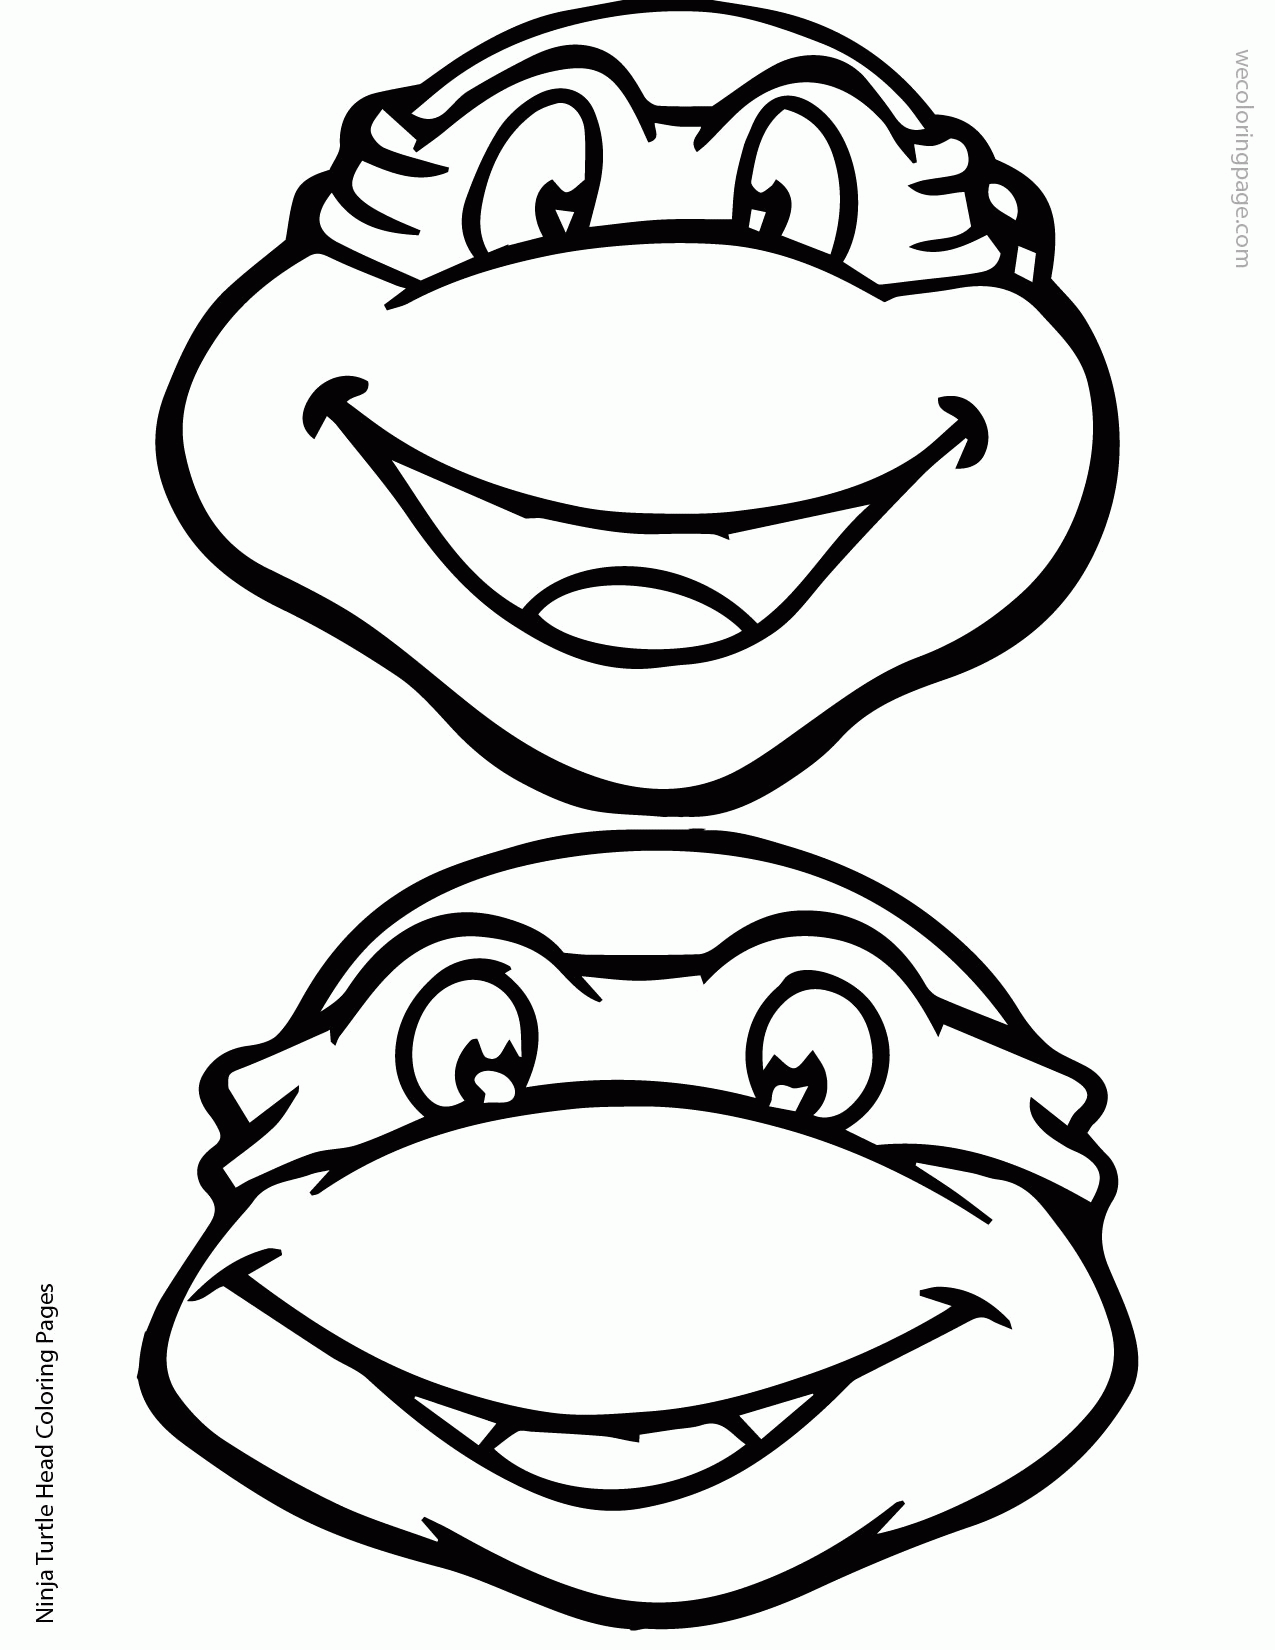 Ninja Turtle head free ninja coloring pages |Free coloring on Clipart Library